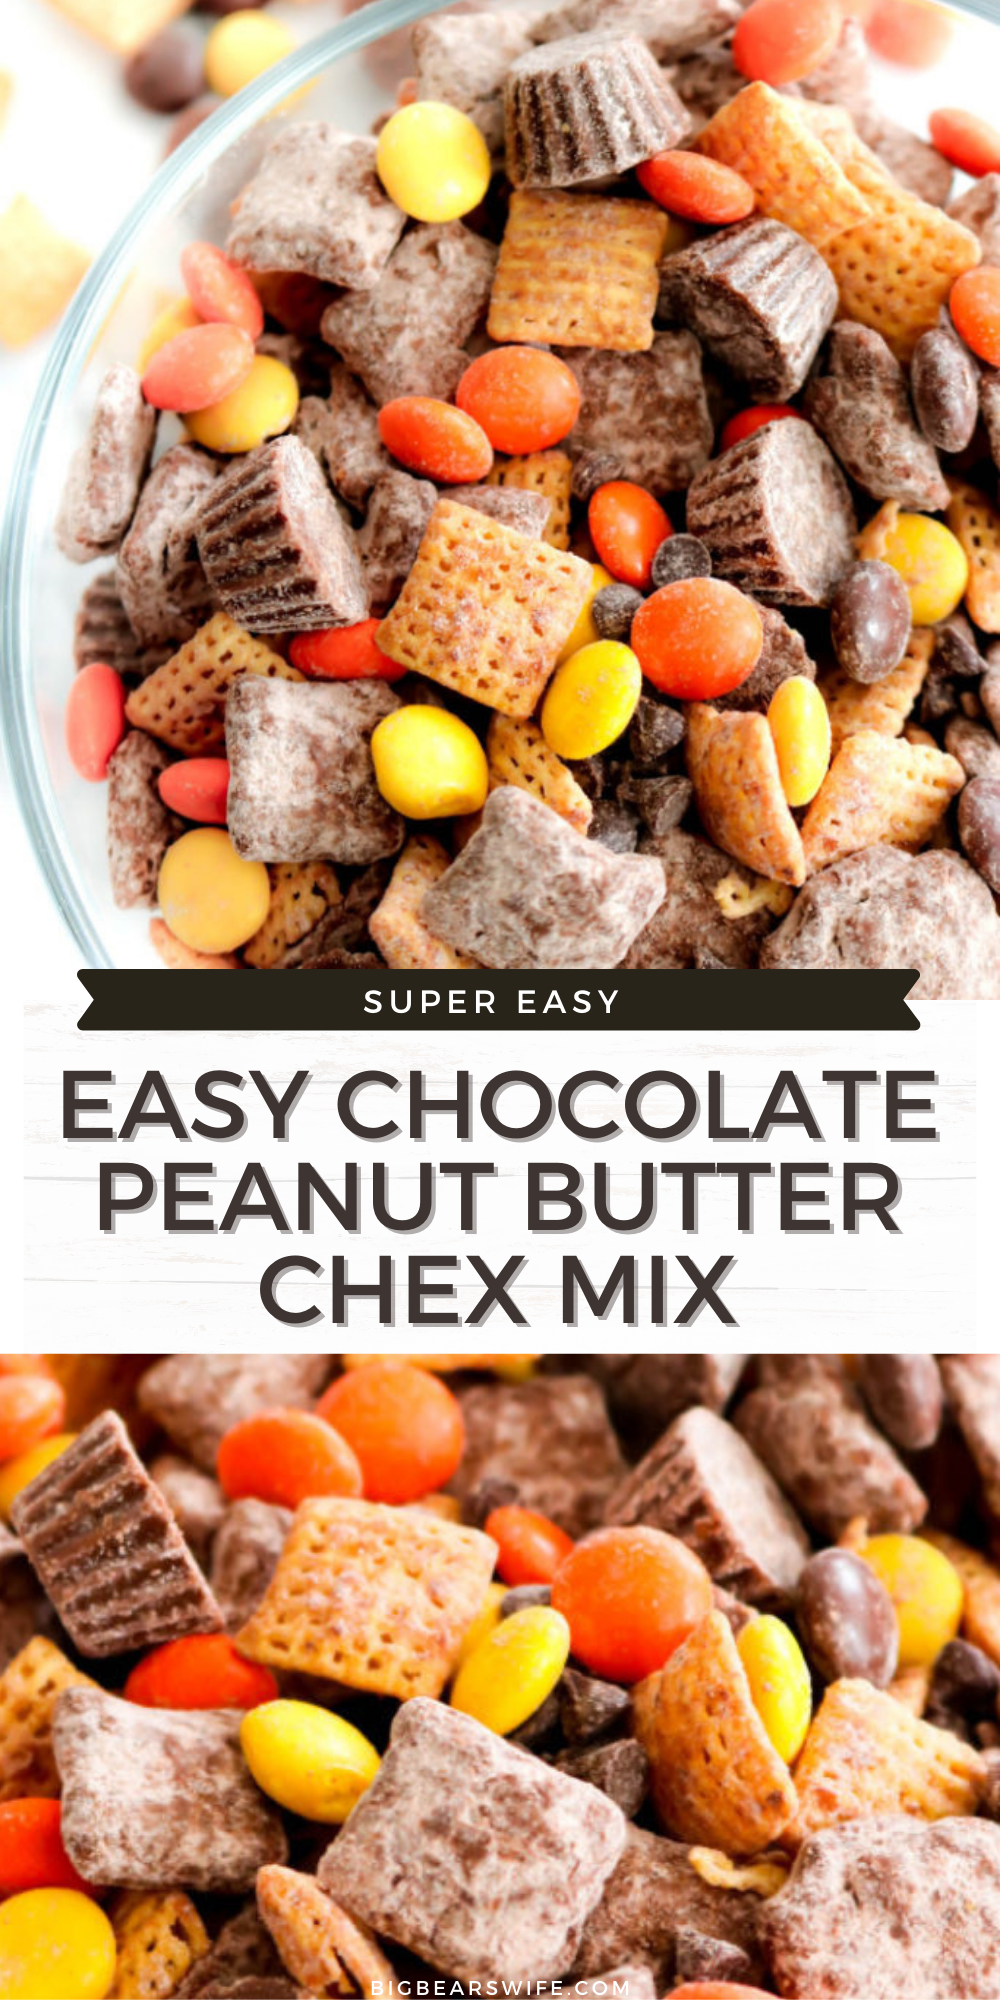 This Chocolate Peanut Butter Chex Mix is what dreams are made of! It's packed with tons of chocolate and peanut butter including peanut butter cereal, mini peanut butter cups and Reese's pieces! via @bigbearswife